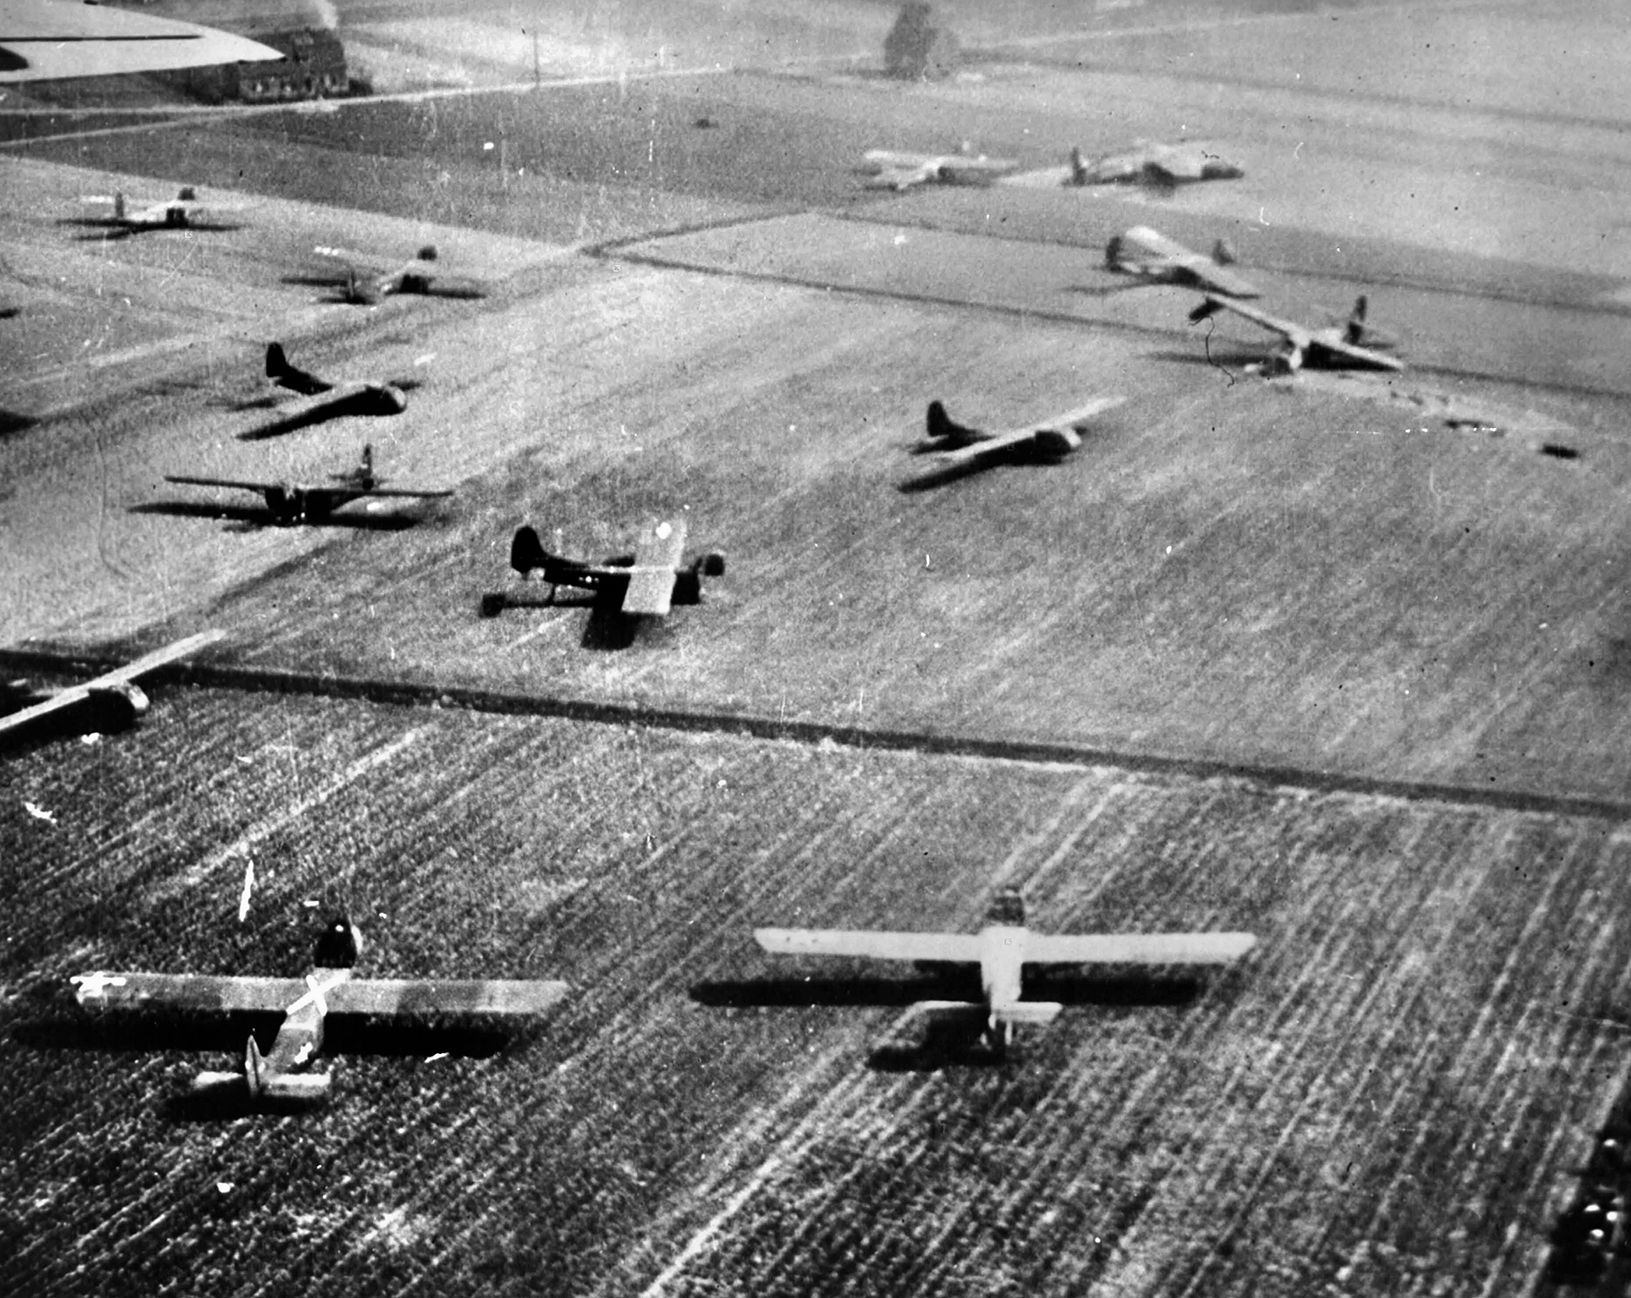 Broad, open fields in Germany made for ideal landing zones during Operation Varsity. Over 1,300 U.S. and British gliders took part. 